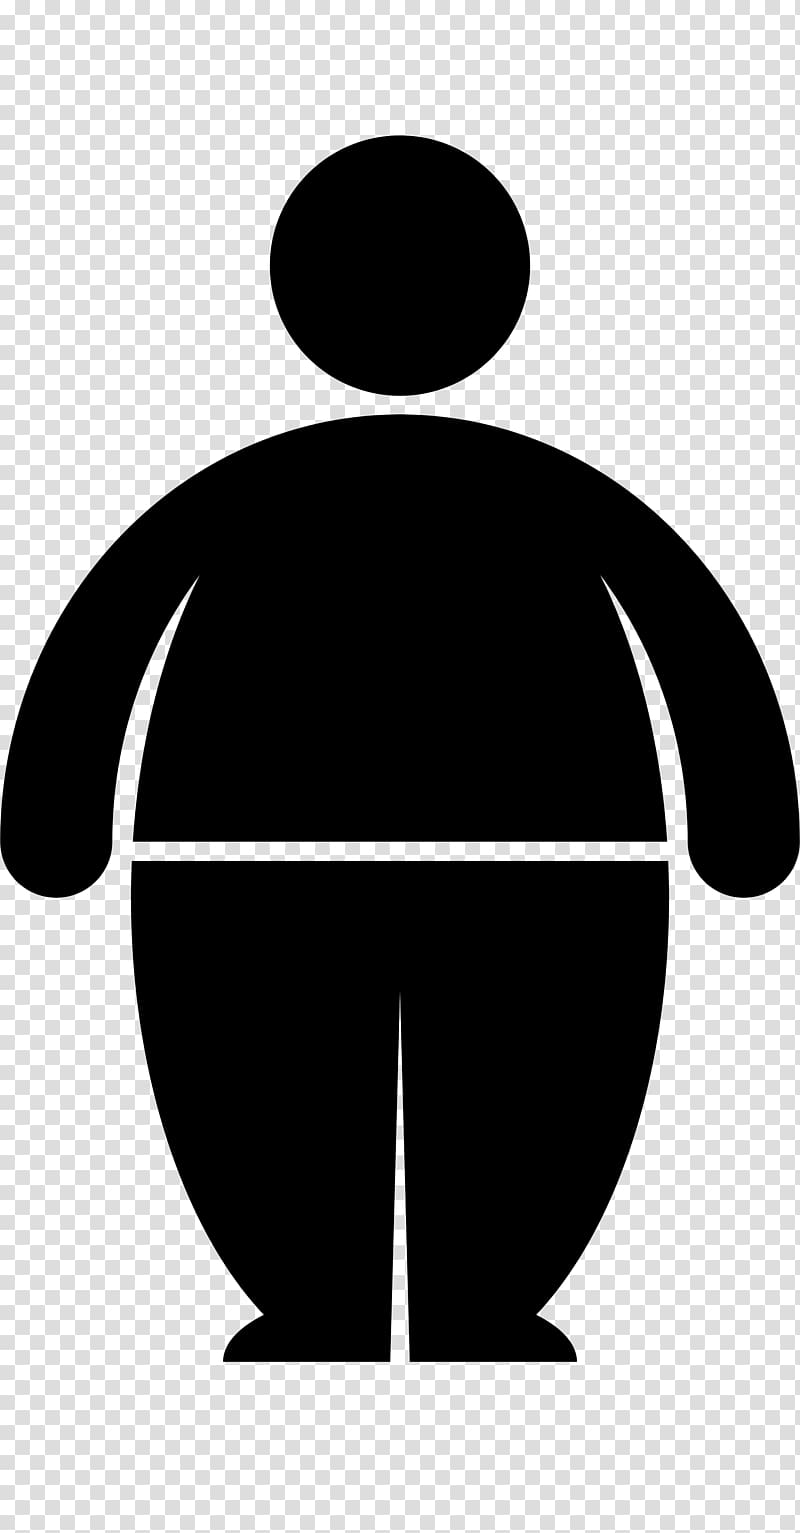 childhood obesity clipart